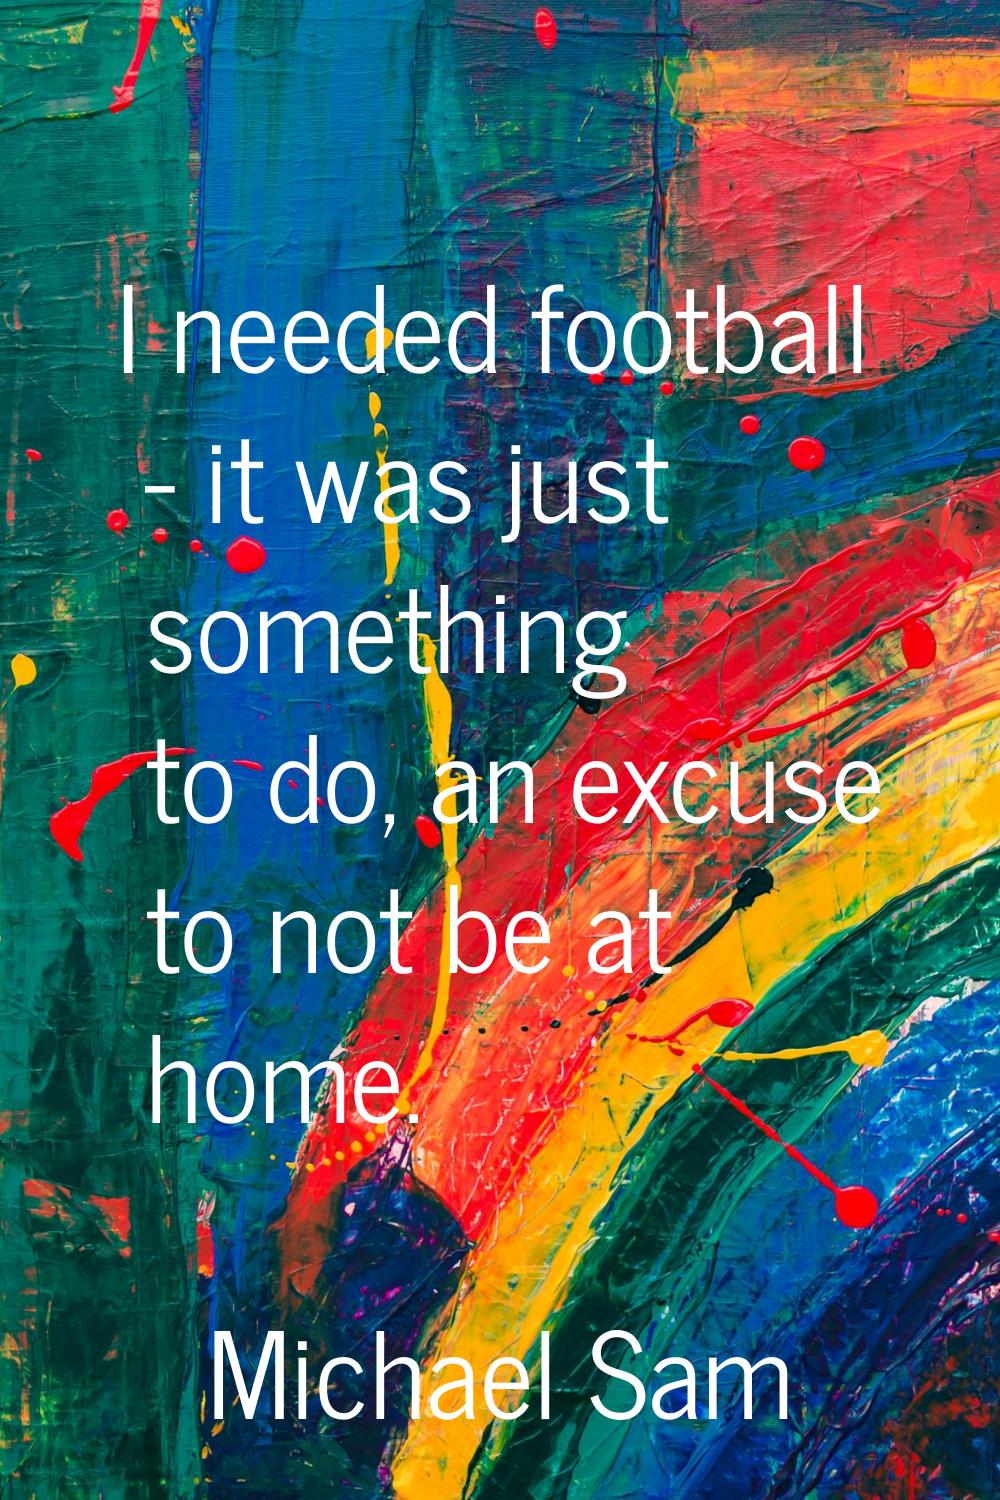 I needed football - it was just something to do, an excuse to not be at home.